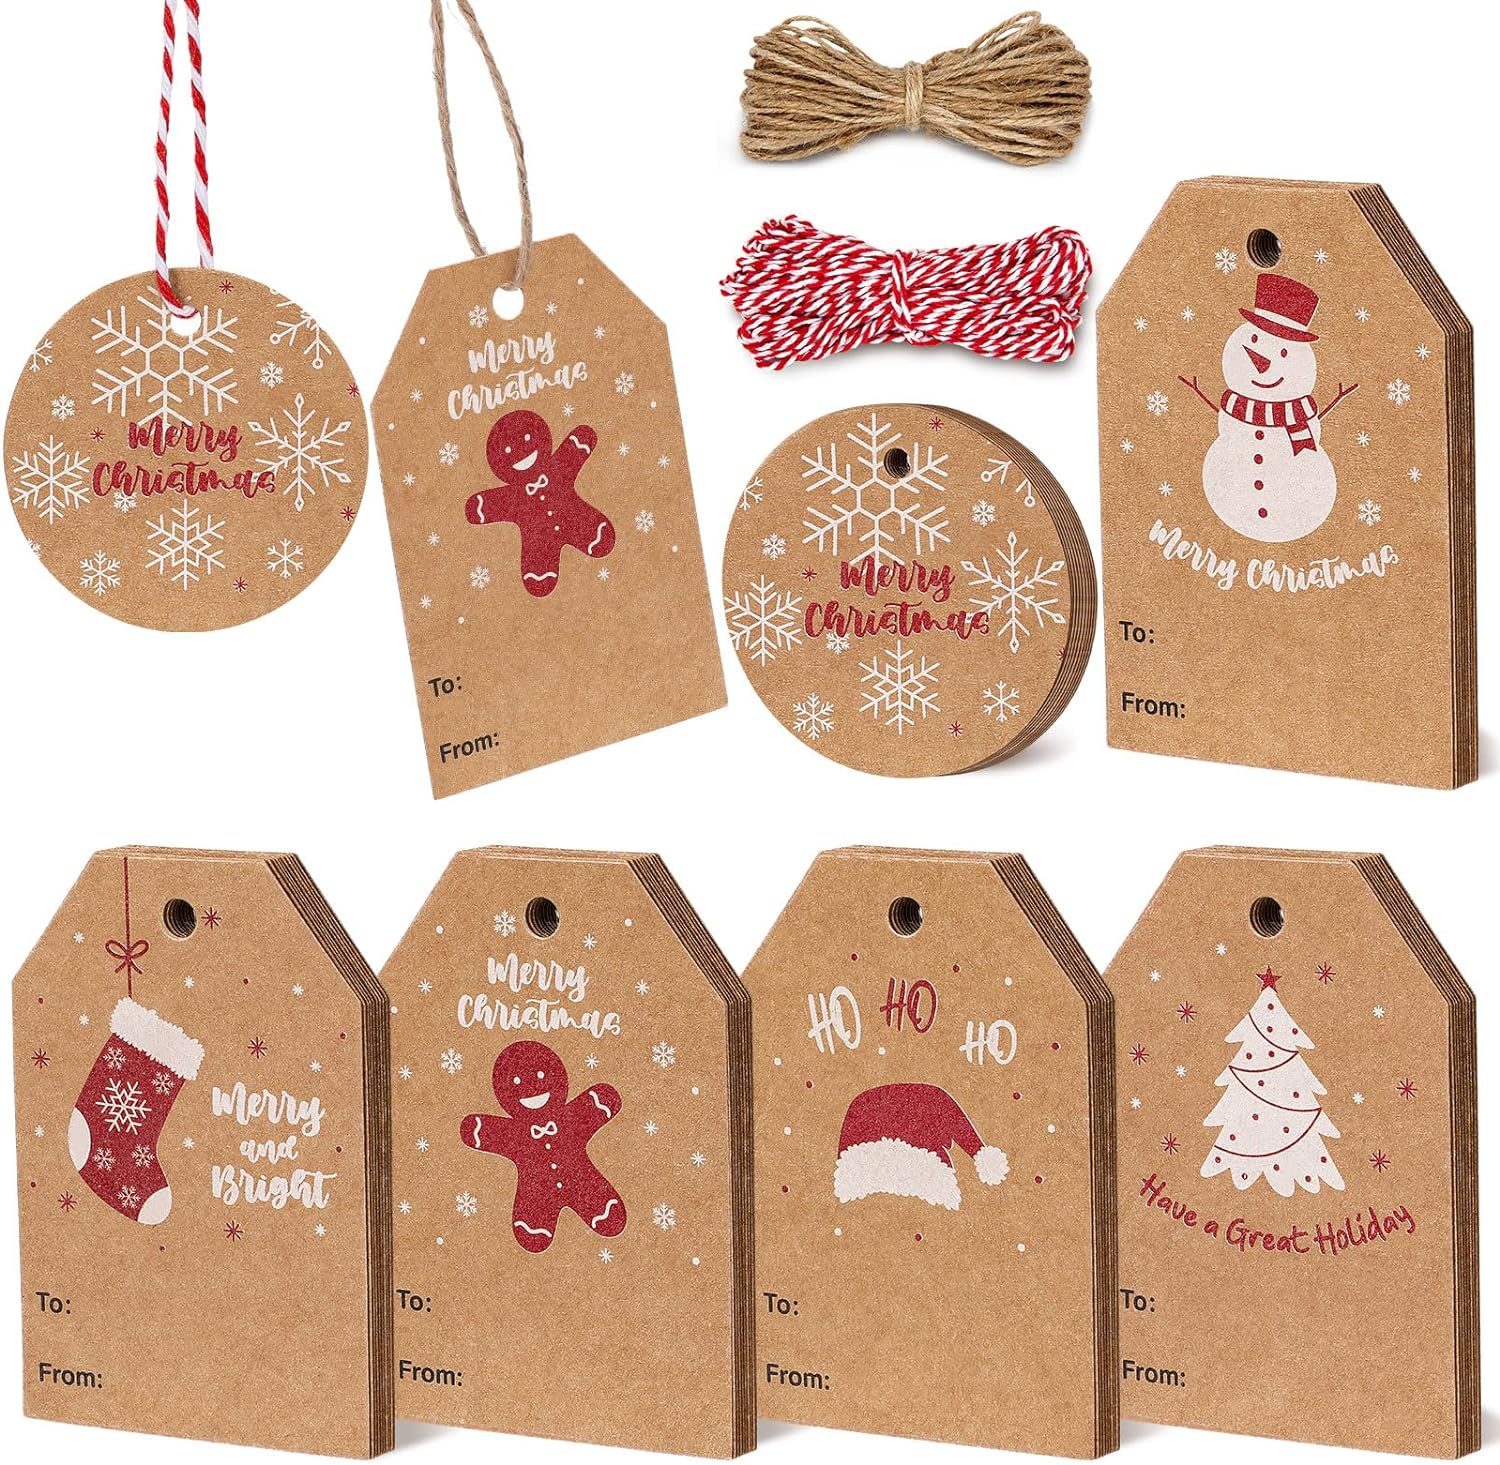 Blisstime 60pcs Christmas Gift Tags with String, Brown Kraft Gift Tags 6 Designs Xmas Tags for Gifts Wrapping